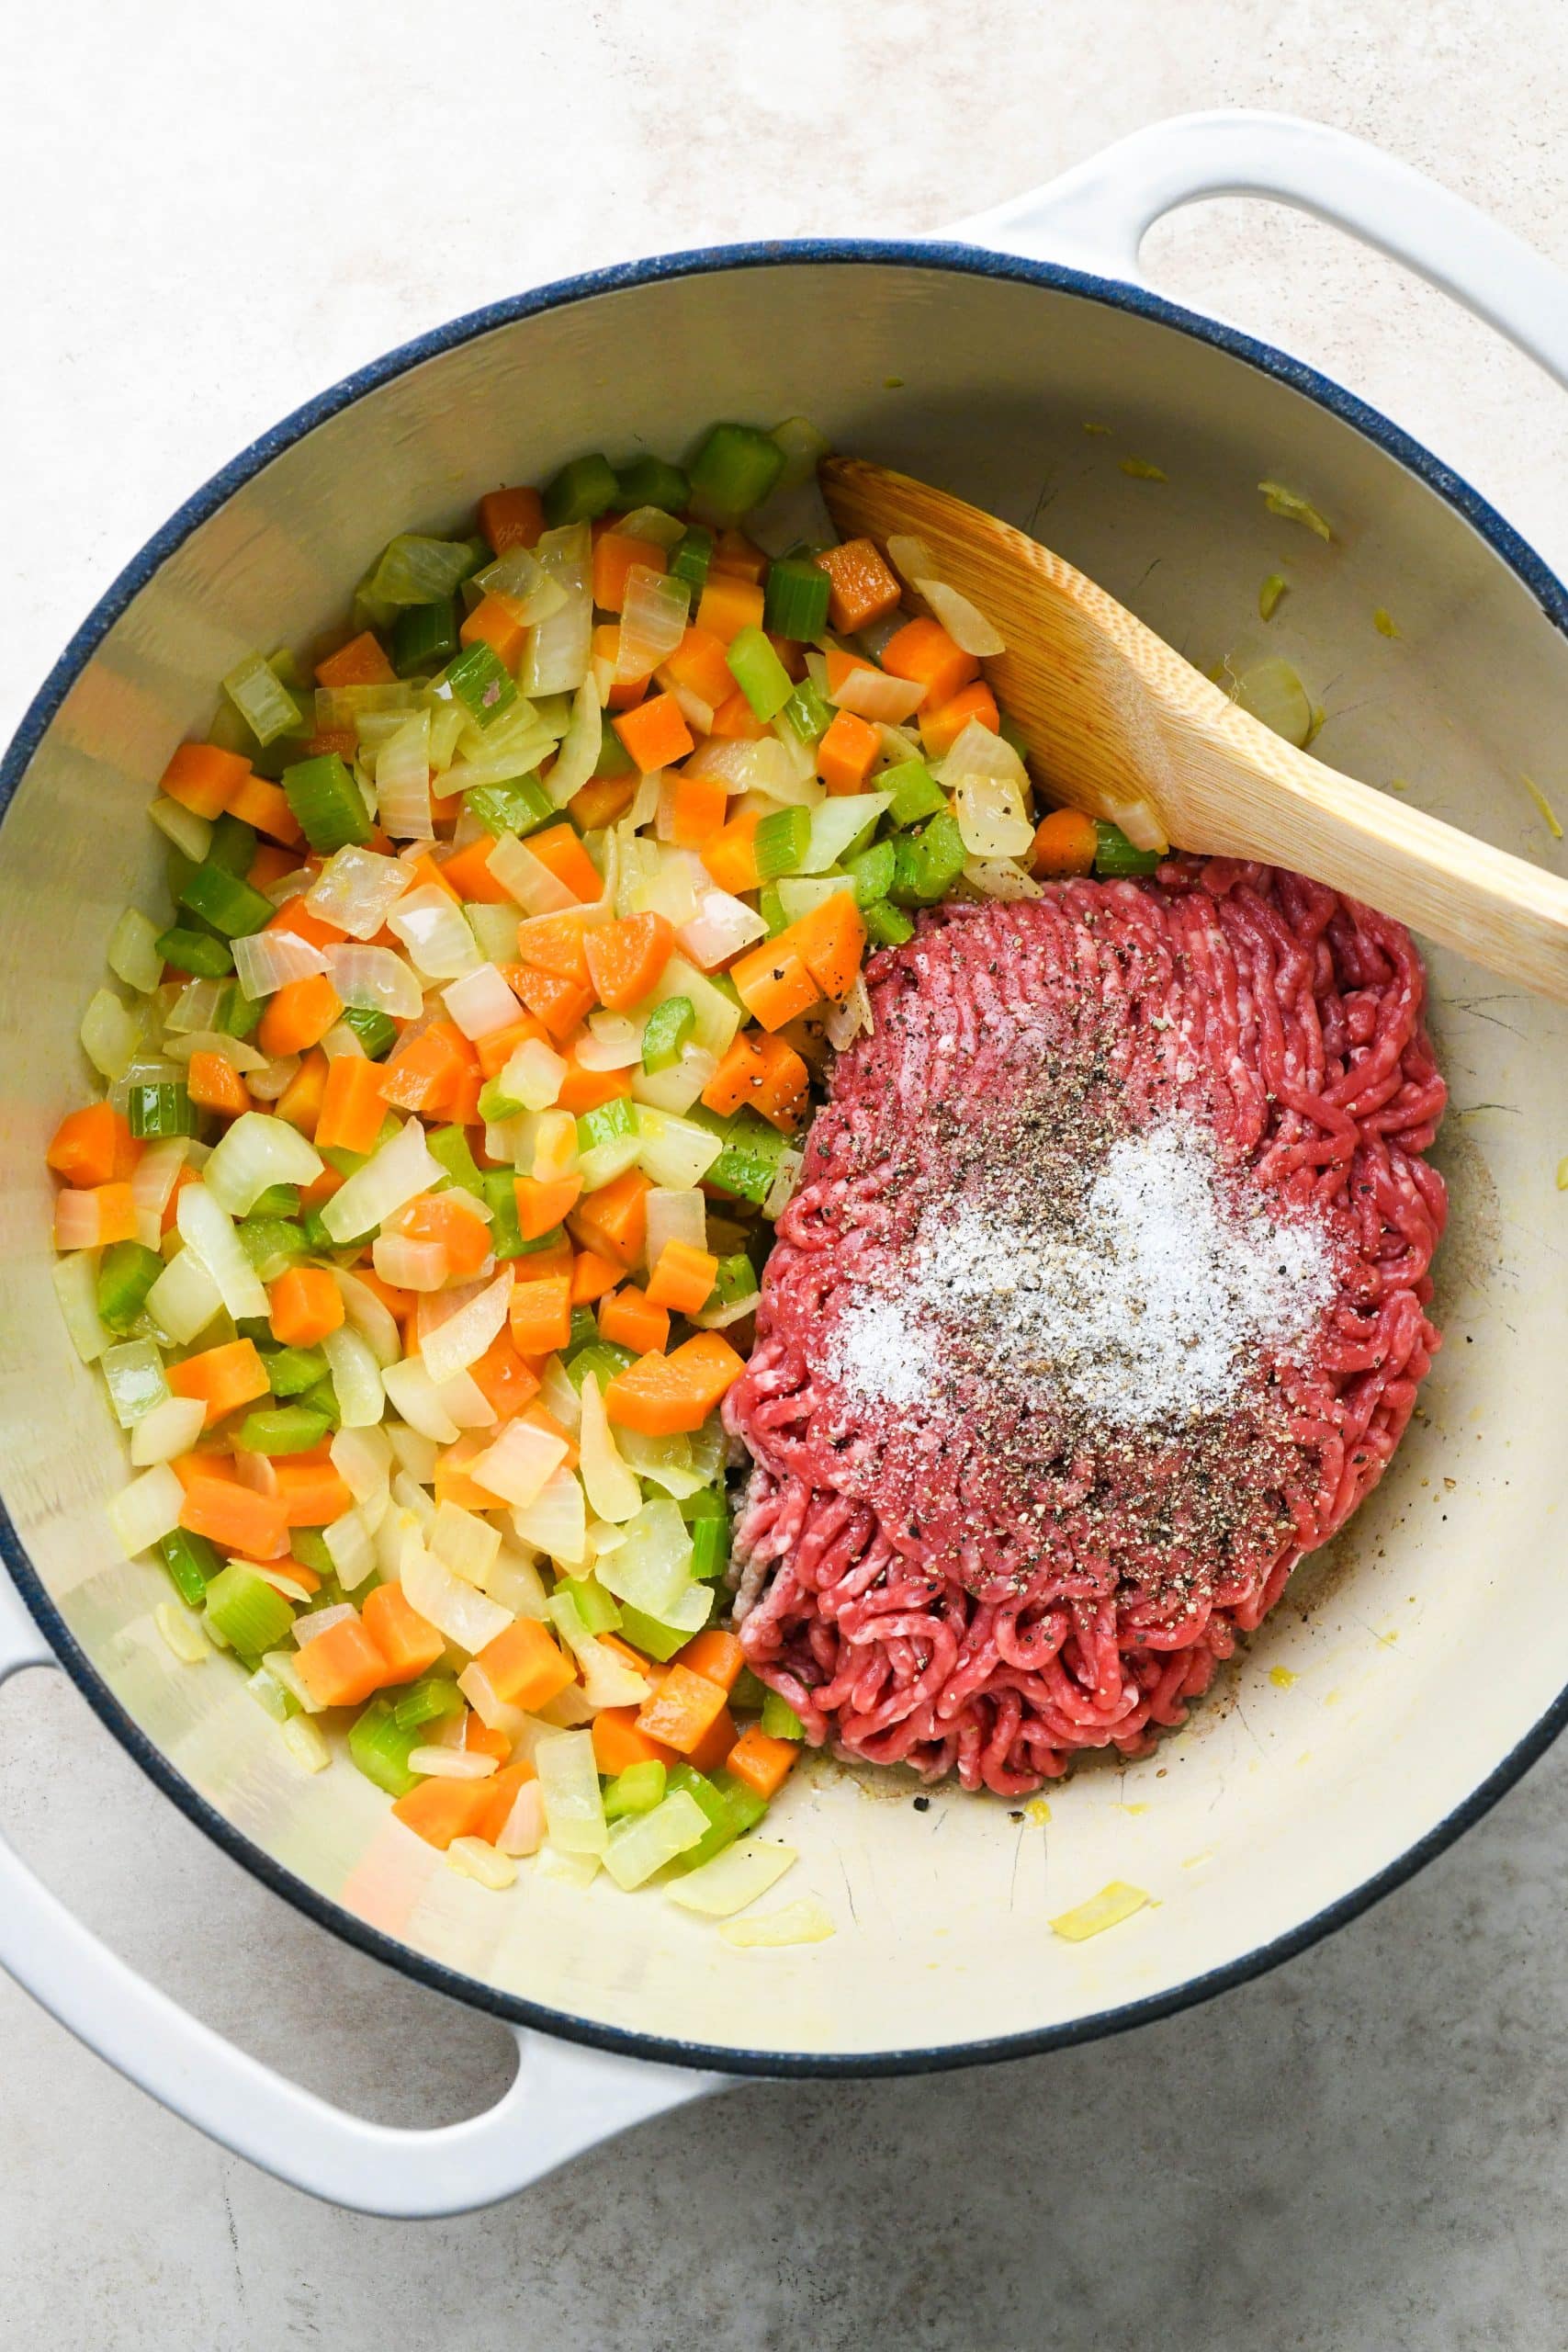 How to make shepherds pie soup: Adding ground beef with salt and pepper to the soup pot.